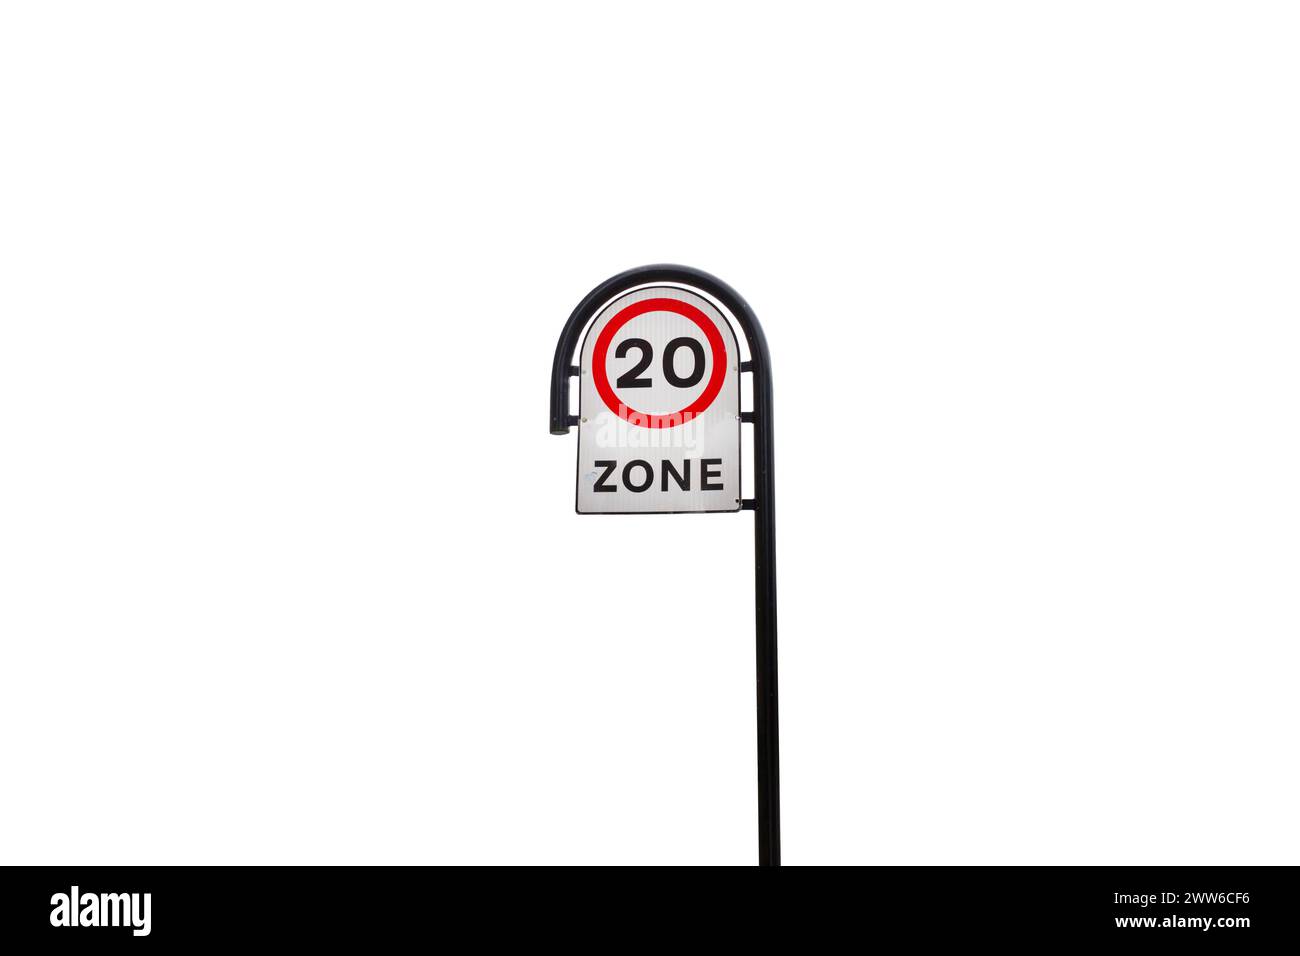 20mph zone speed limit road warning sign. Isolated on a white background Stock Photo